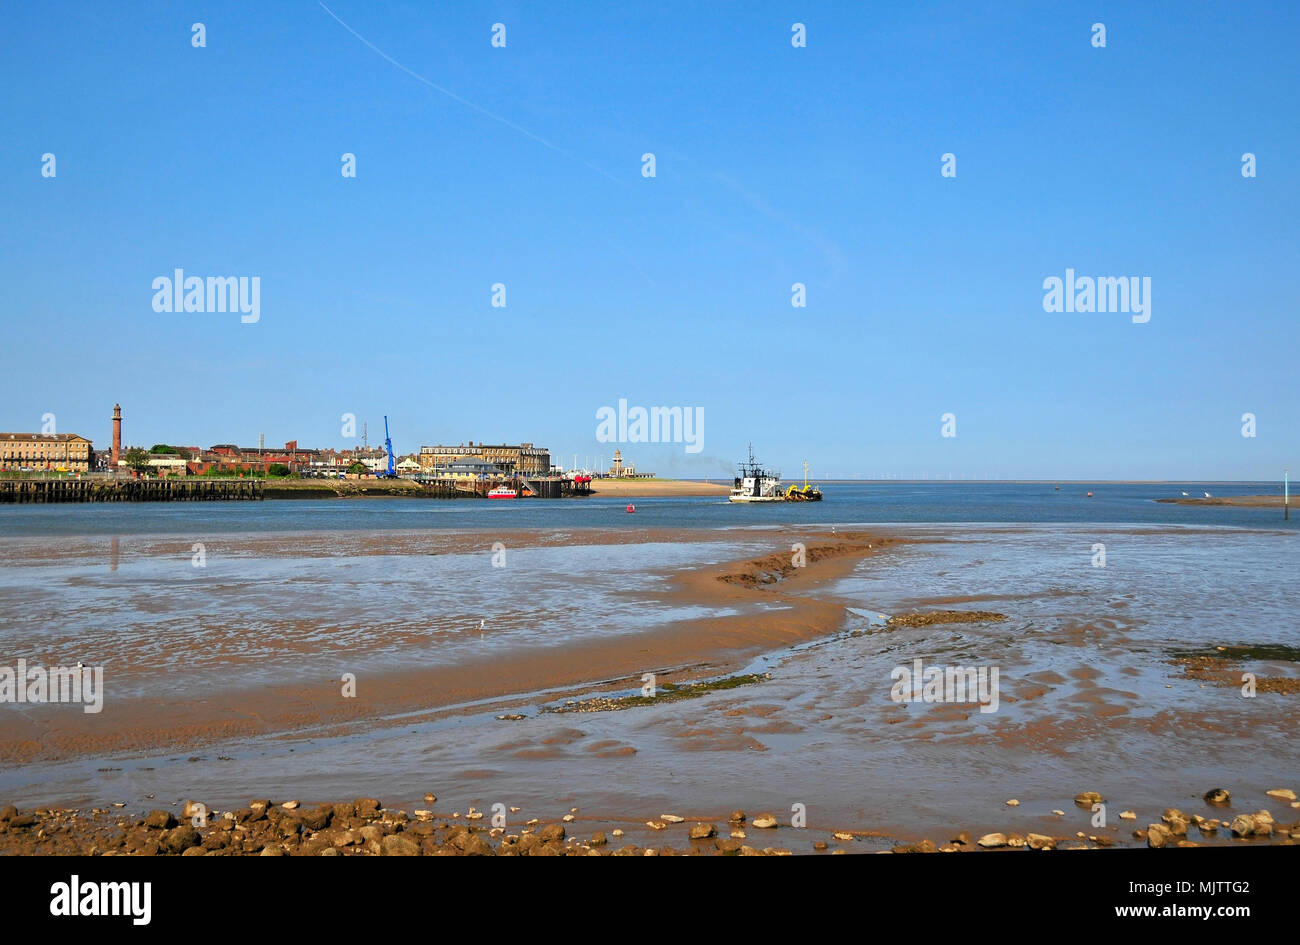 Blue sky wet beach view to dredger moving out to sea River Wyre Channel from Knott End to Fleetwood lighthouses and buildings, Lancashire, UK Stock Photo